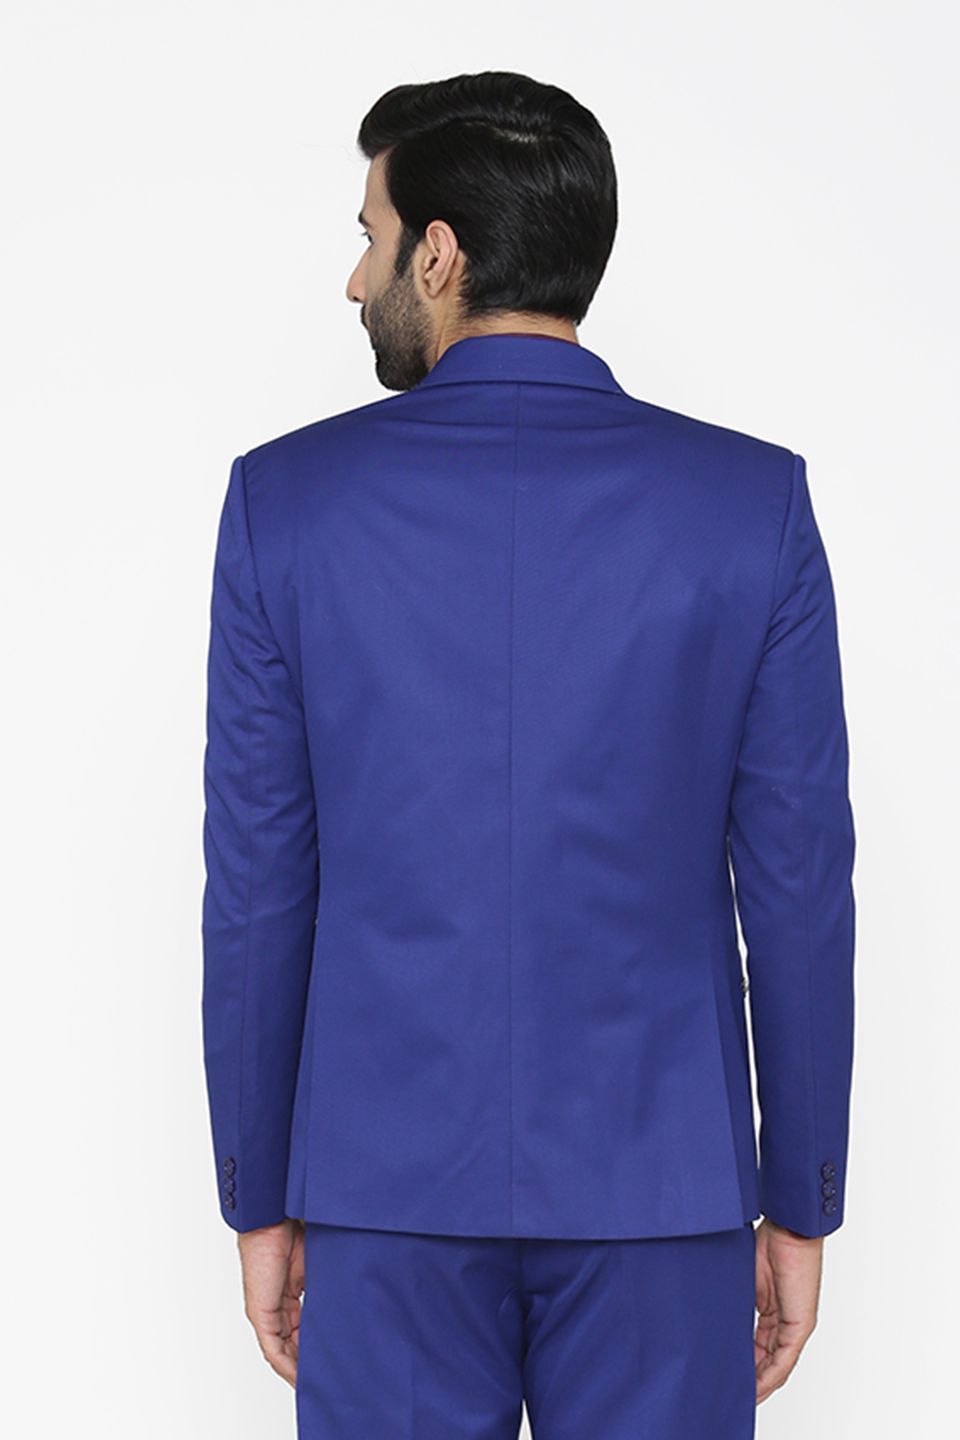 Wintage Men's Polyester Cotton Festive and Casual Blazer Coat Jacket : Blue